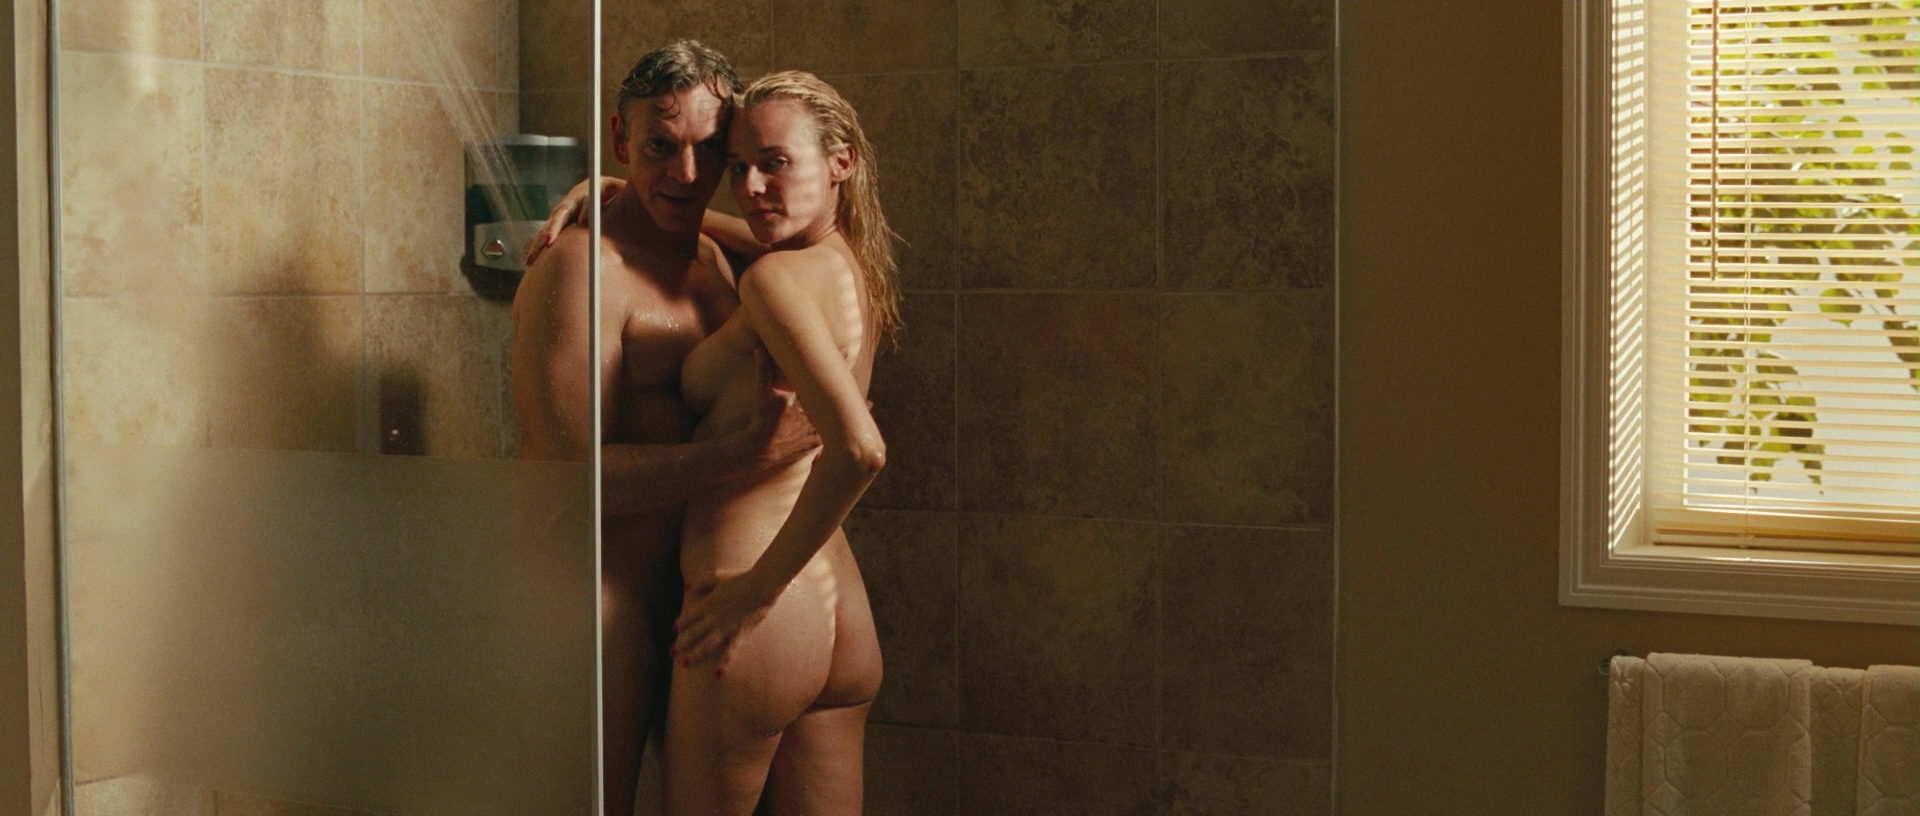 Diane Kruger - The Age of Ignorance (2007) HD 1080p